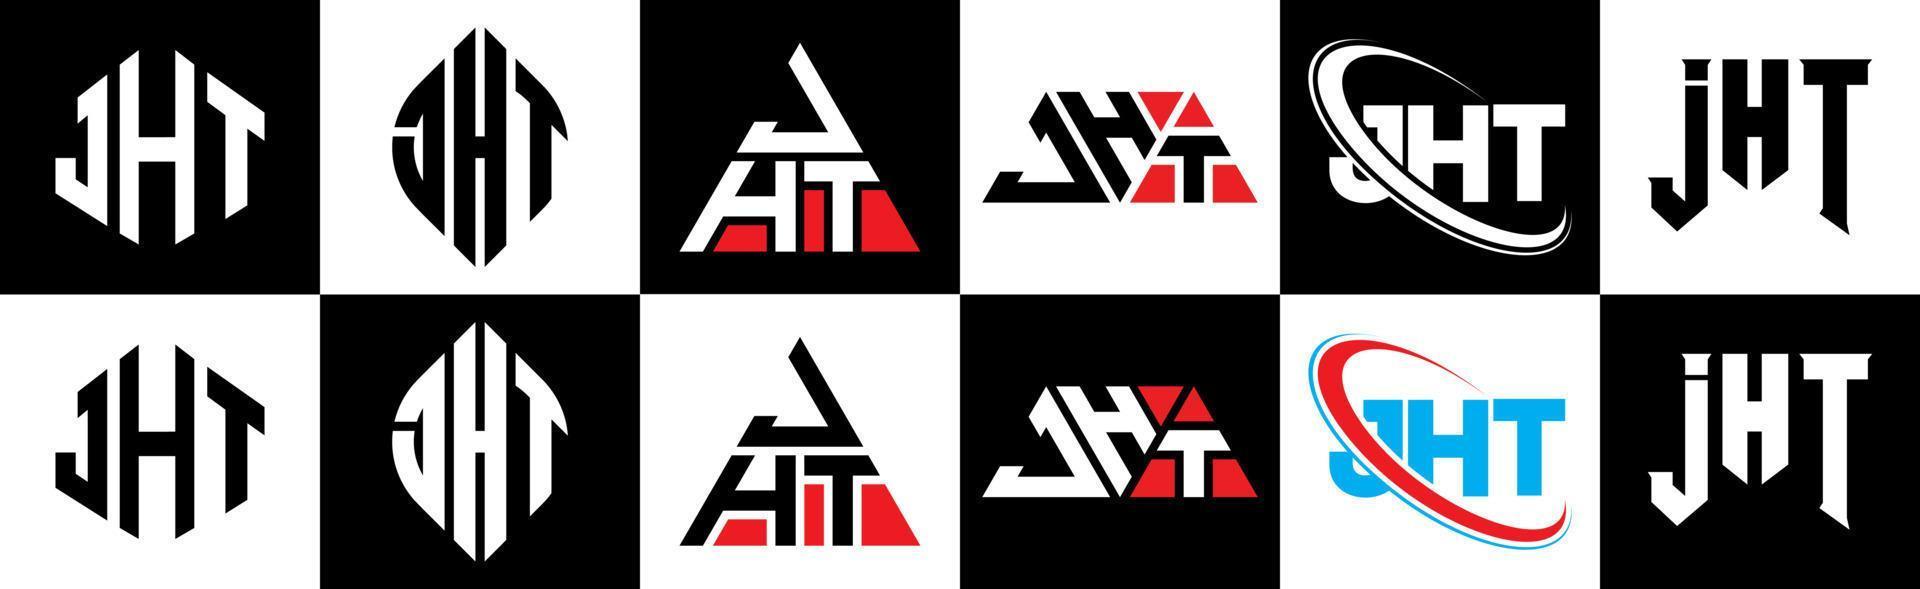 JHT letter logo design in six style. JHT polygon, circle, triangle, hexagon, flat and simple style with black and white color variation letter logo set in one artboard. JHT minimalist and classic logo vector